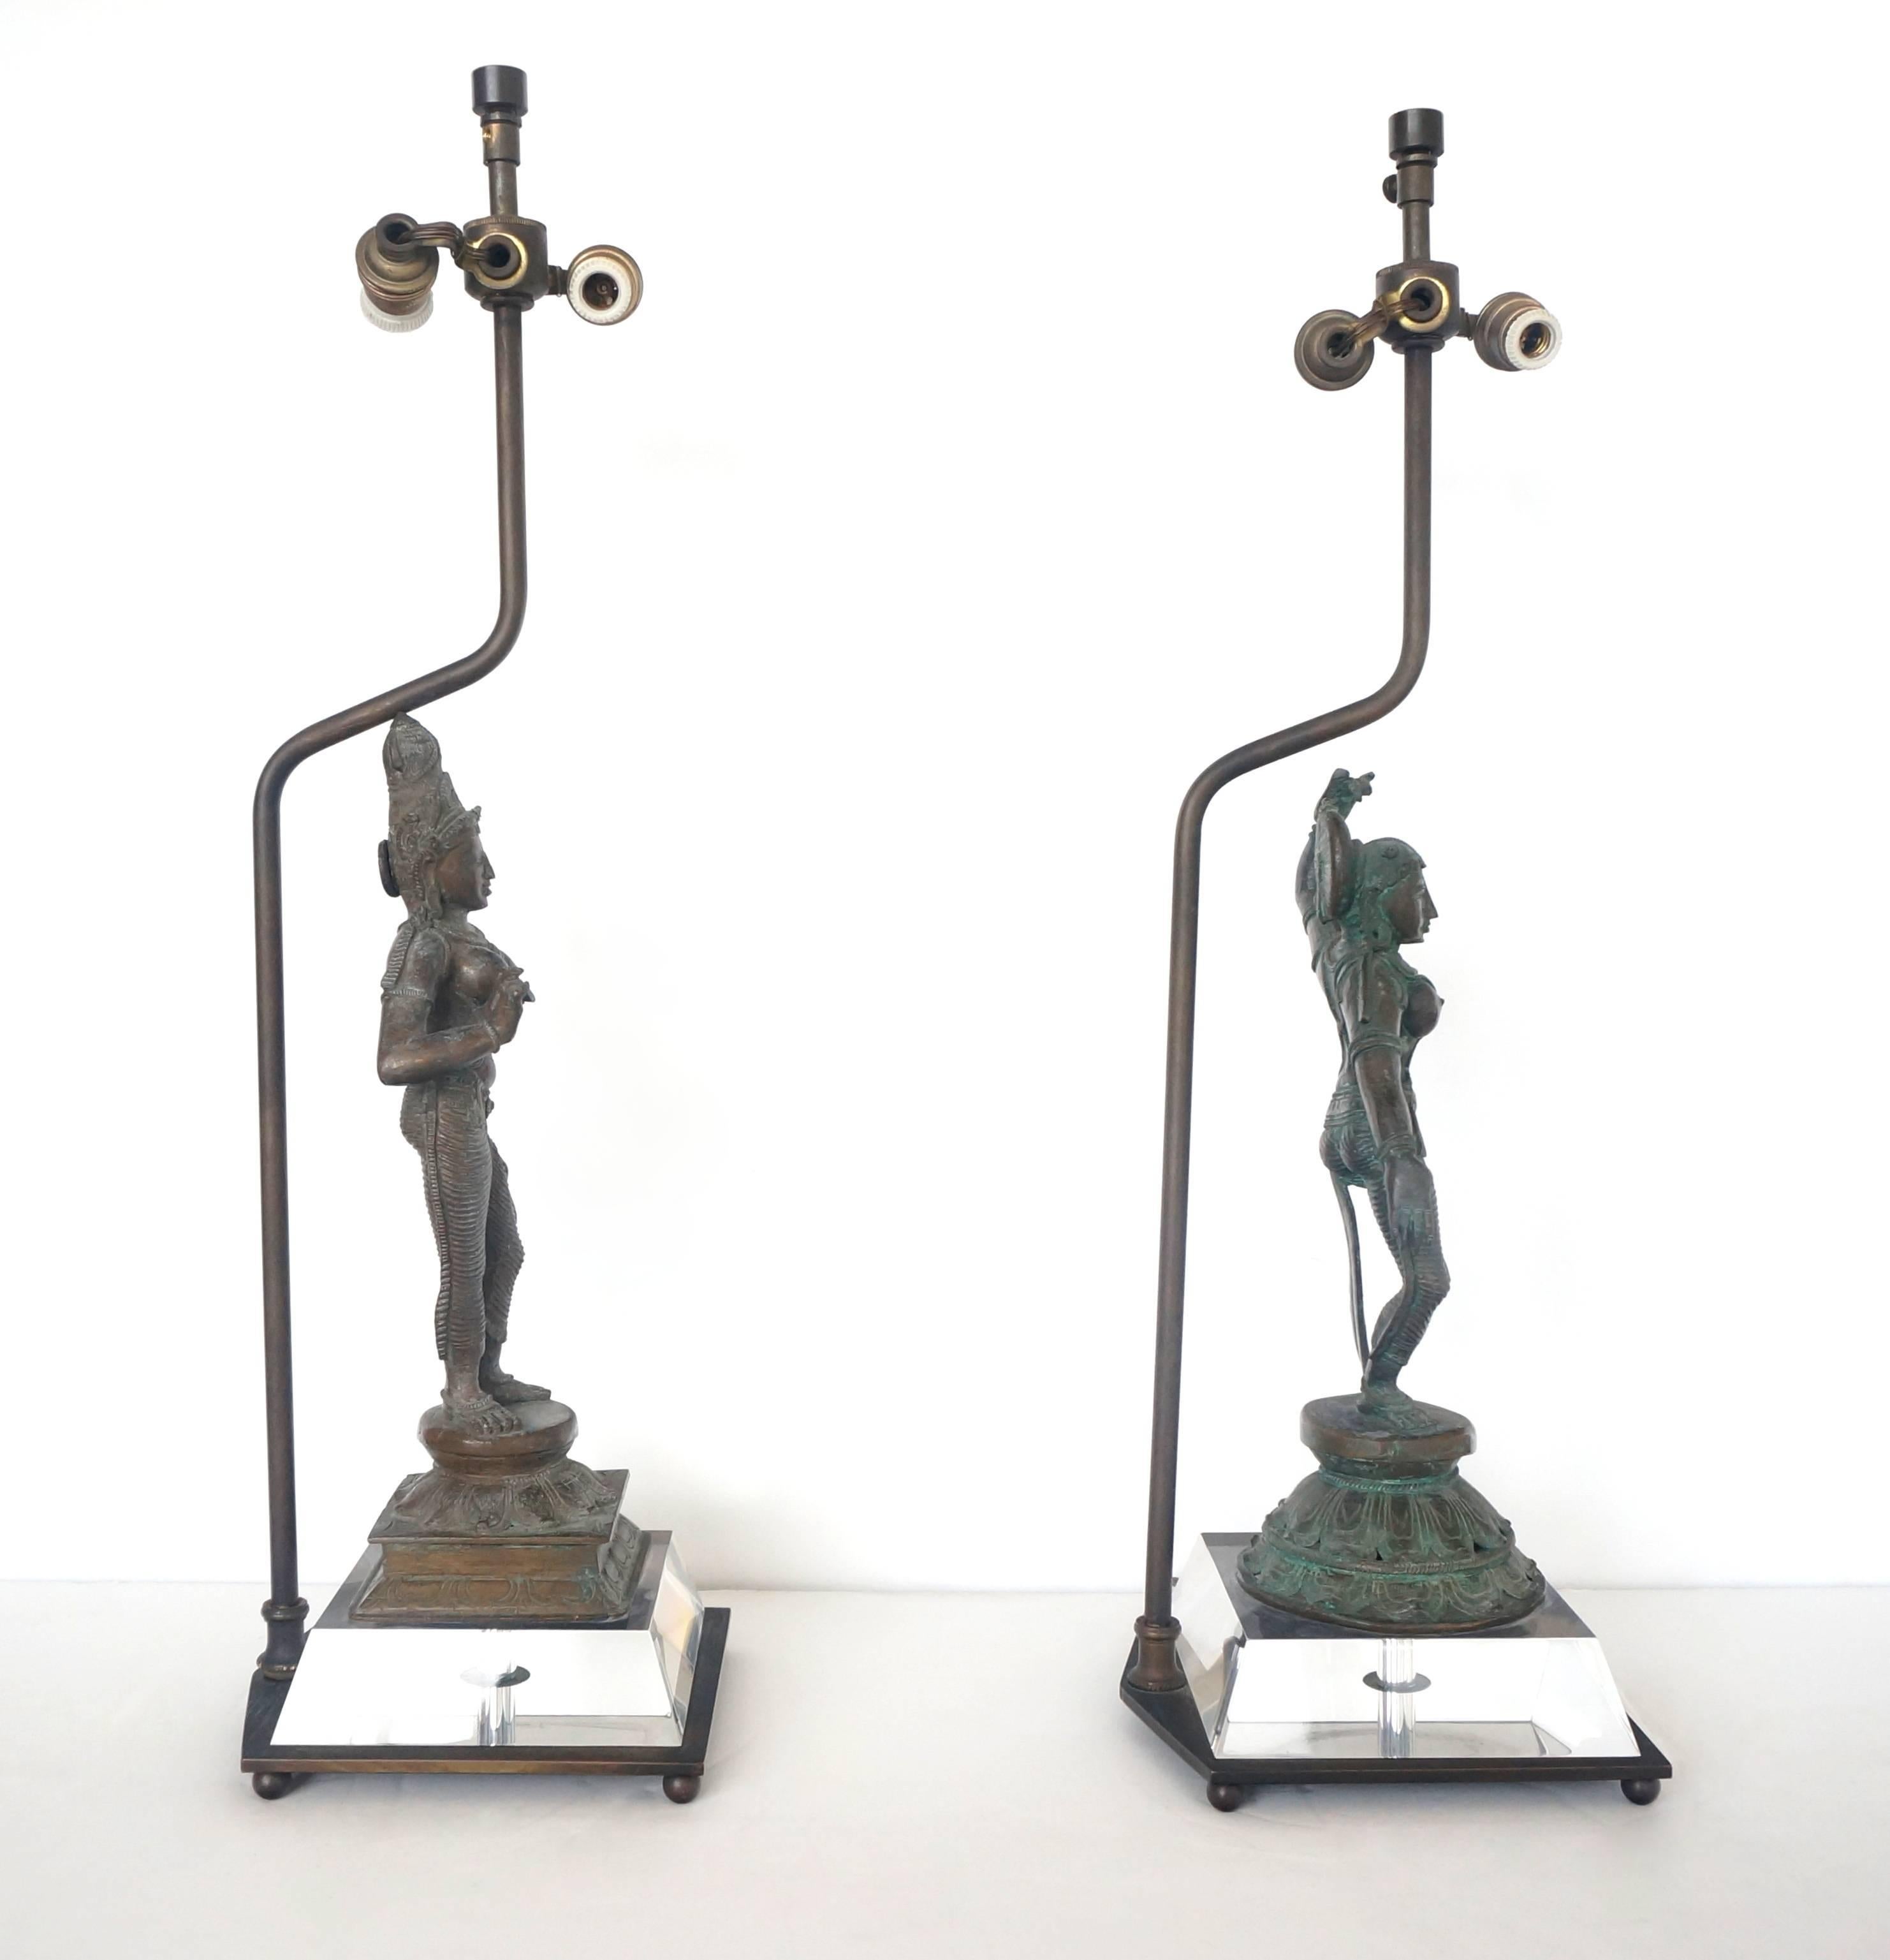 This set of two table lamps were created using two bronze castings of the Hindu goddess Uma (or Parvati). The pieces date from the 19th century and possibly earlier. The electrical hardware looks to date from the 1930s-1940s and both are in working